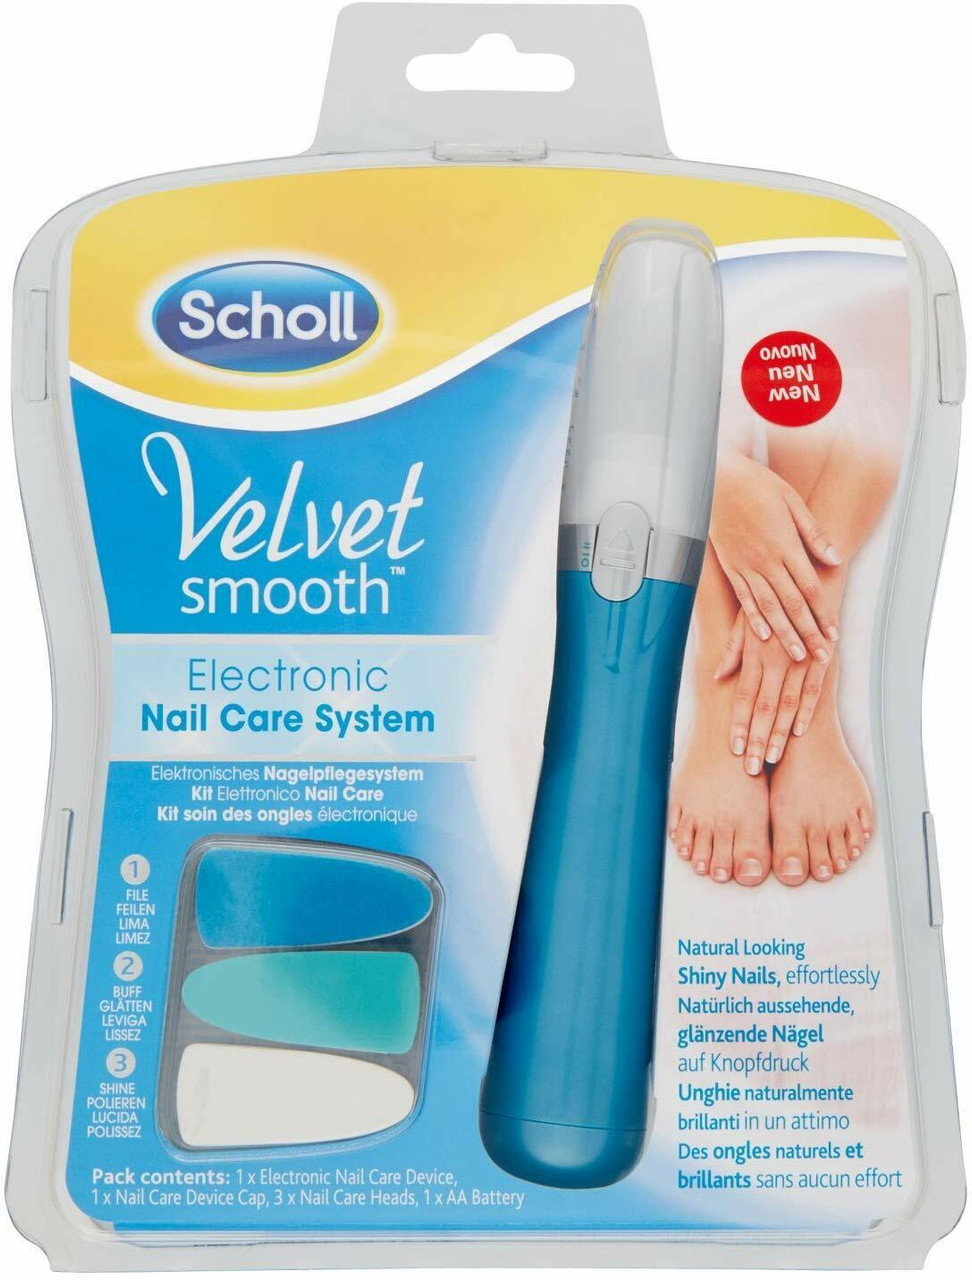 Scholl Velvet Smooth Nail Care System Pink electric nail file + Scholl  Velvet Smooth Pink spare head for electric nail file 3 pieces, duopack -  VMD parfumerie - drogerie